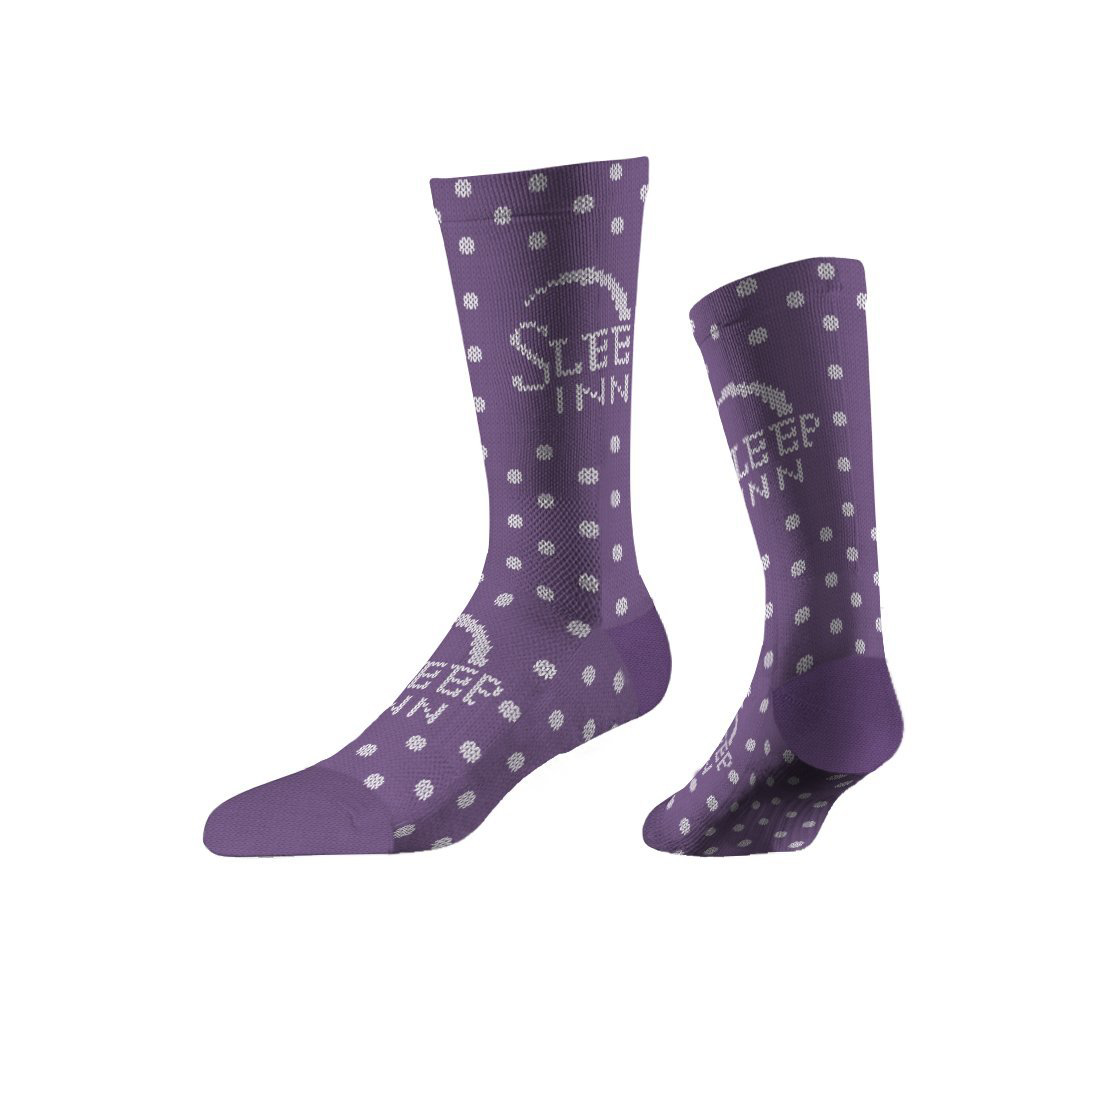 Business Knit Crew Socks in purple with 1 colour logo and colour match stripes